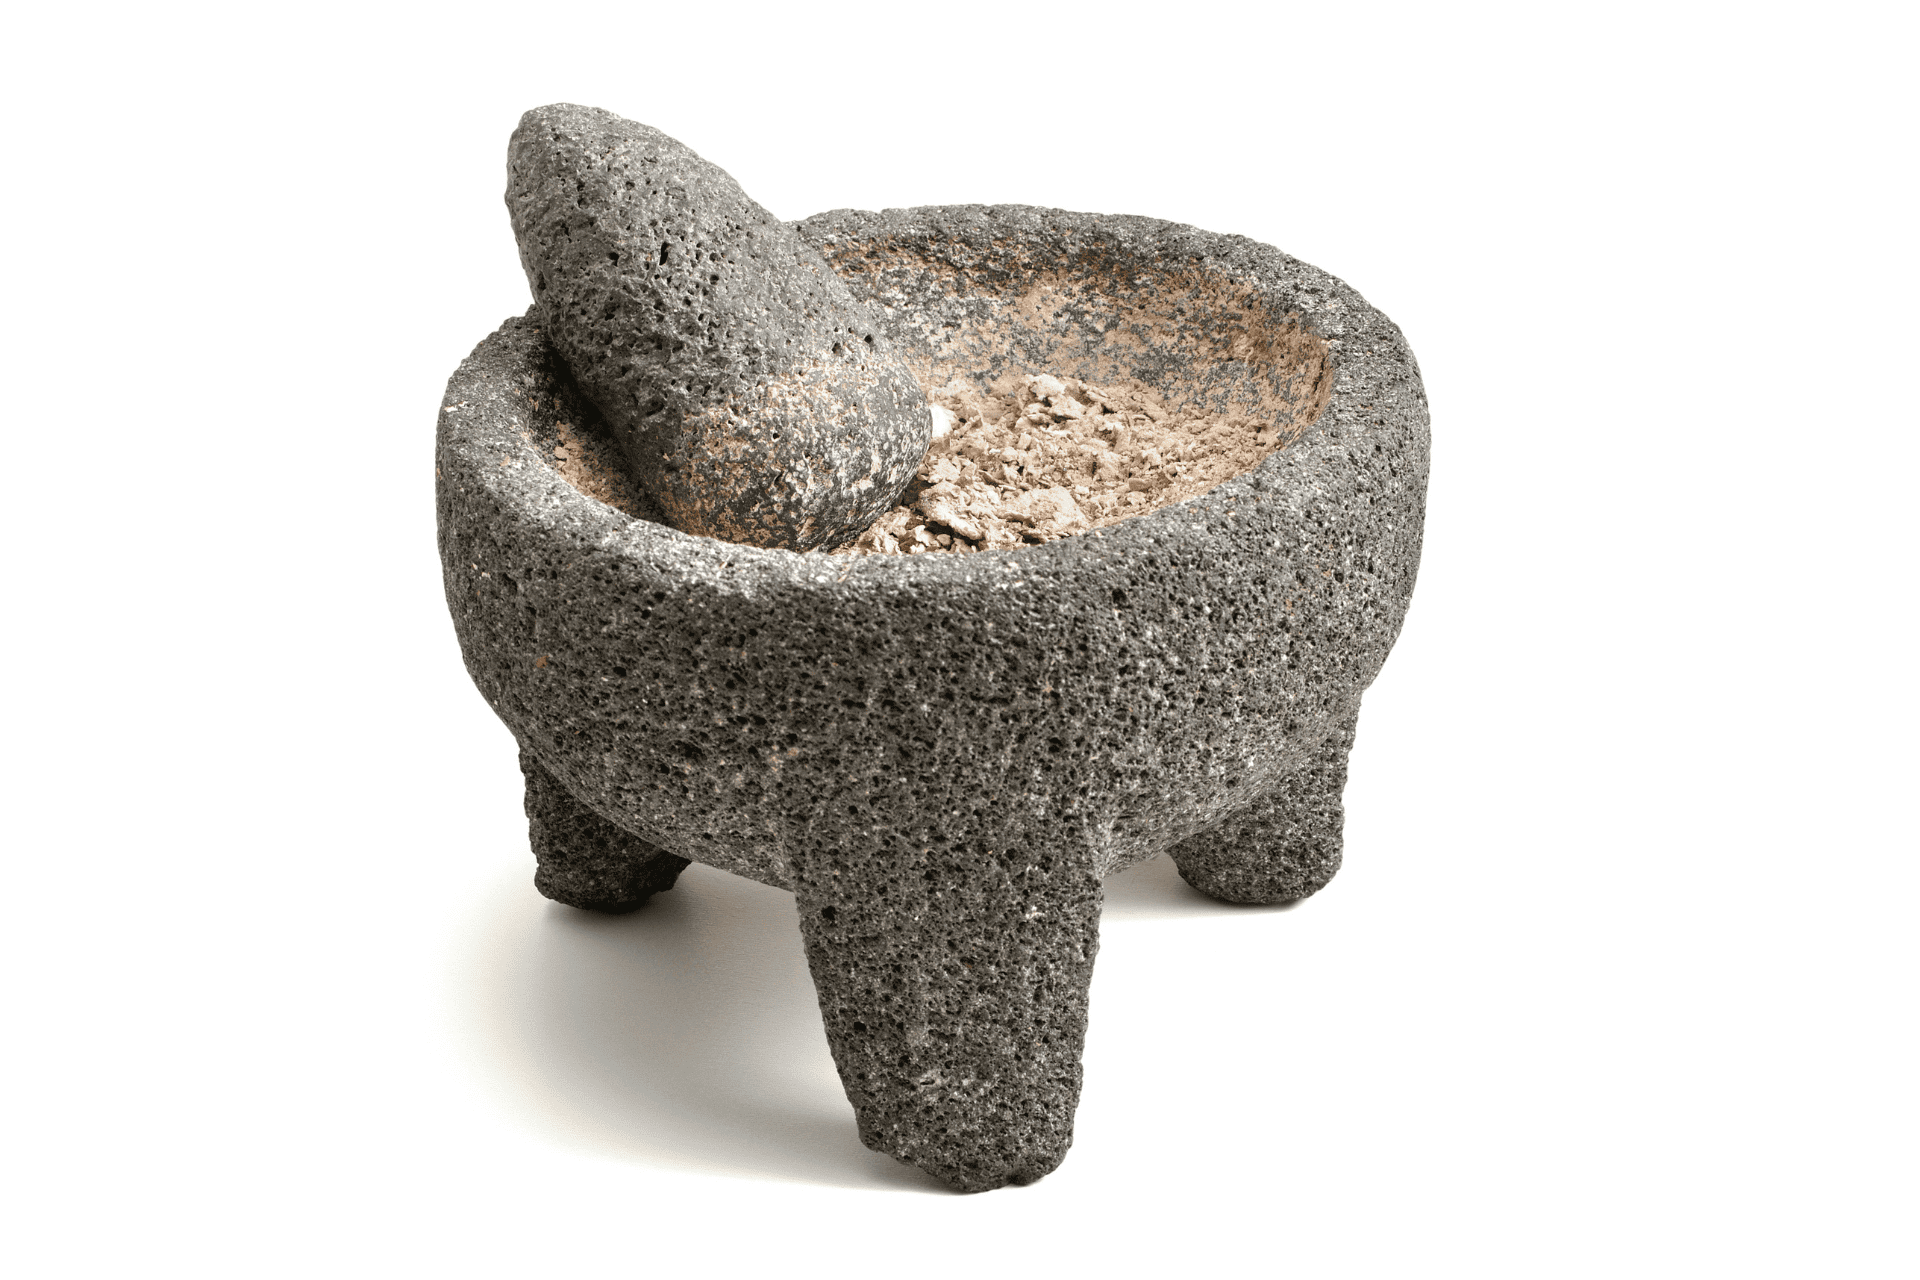 A mortar and pestle made from volcanic rock